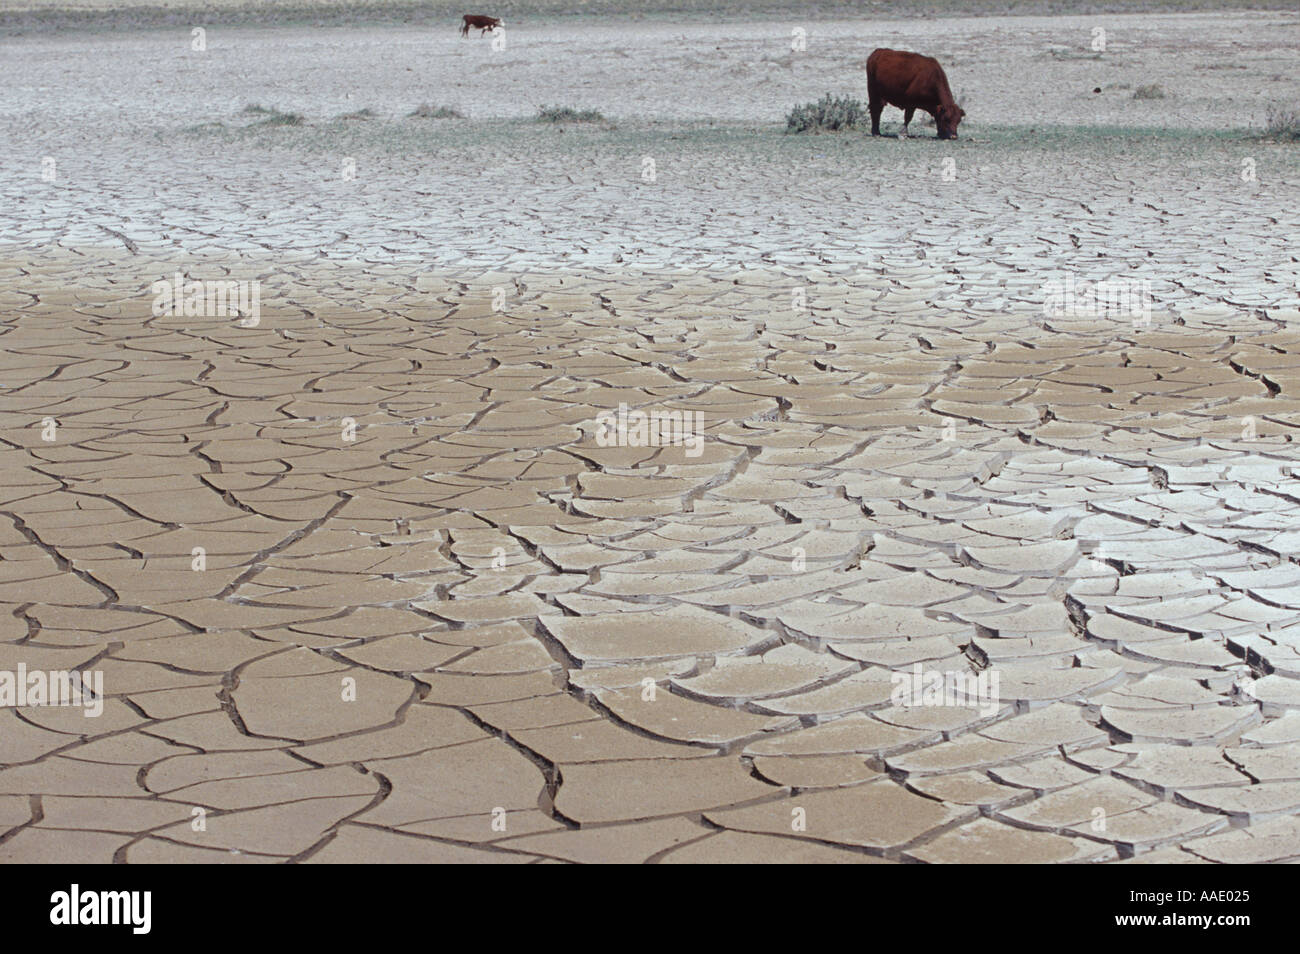 A cow seeks food and water on cracked earth during a prolonged drought Stock Photo